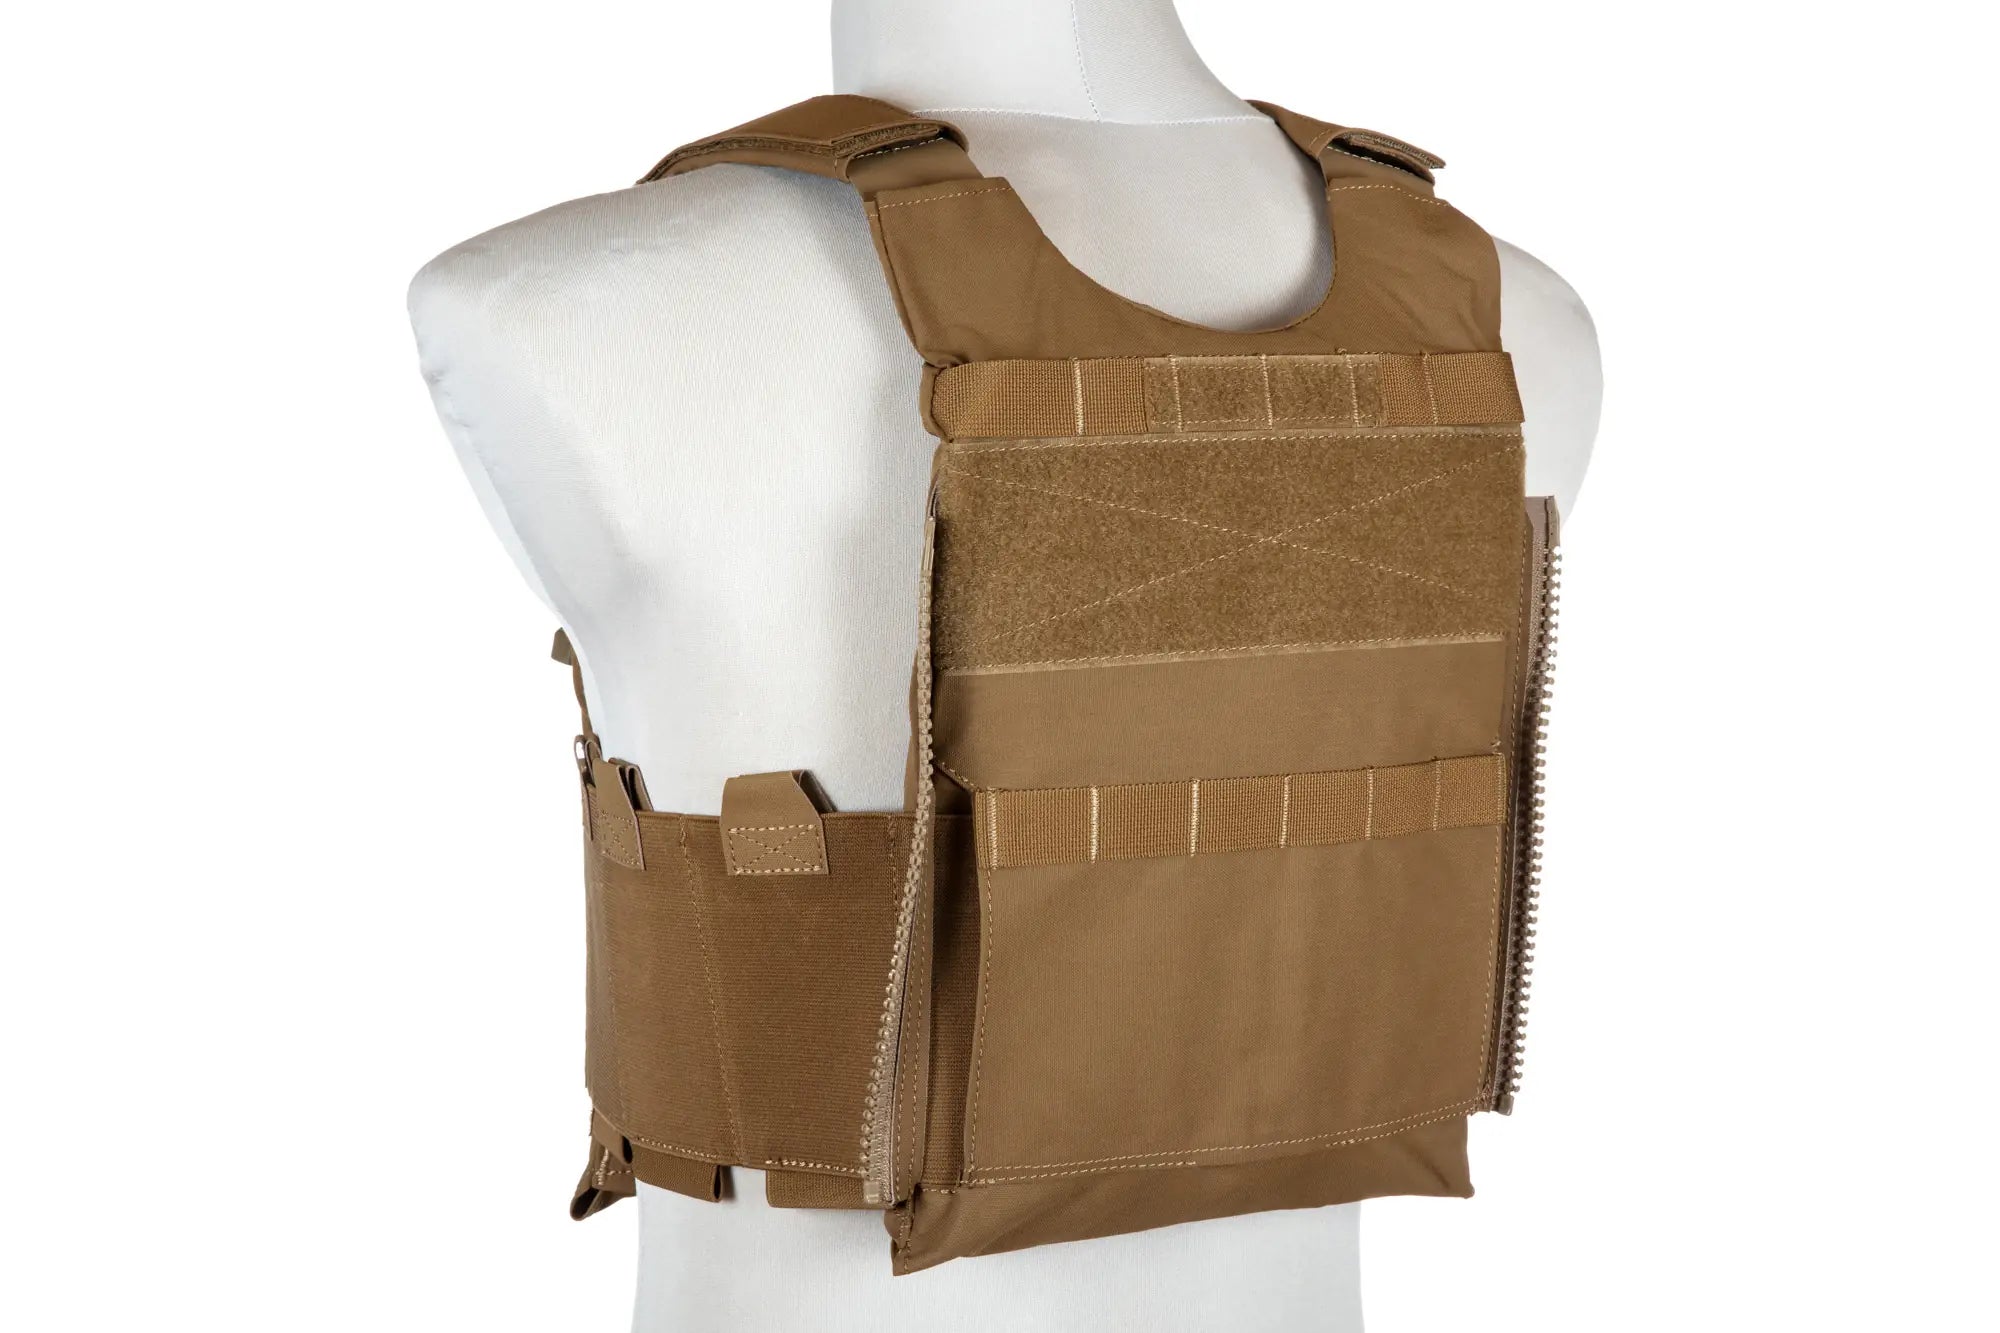 LV-119 Type Tactical Vest - Coyote Brown-5